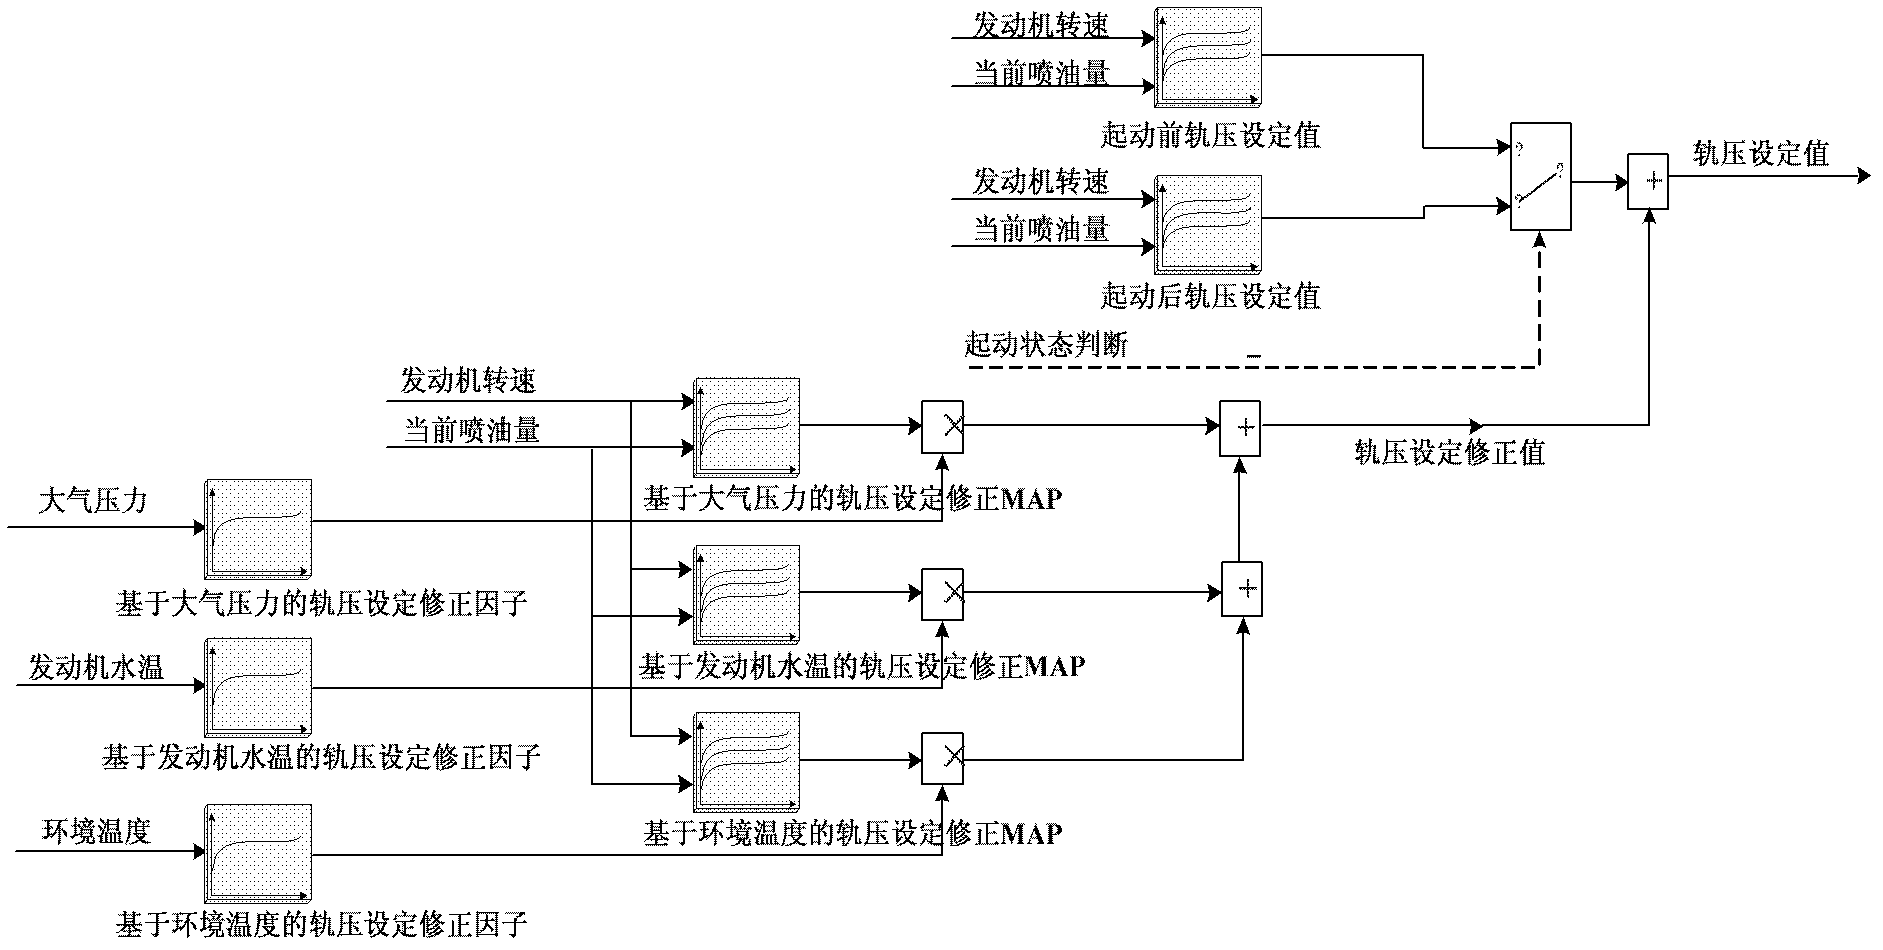 A function calibration system and function calibration method for diesel engine electronic control data